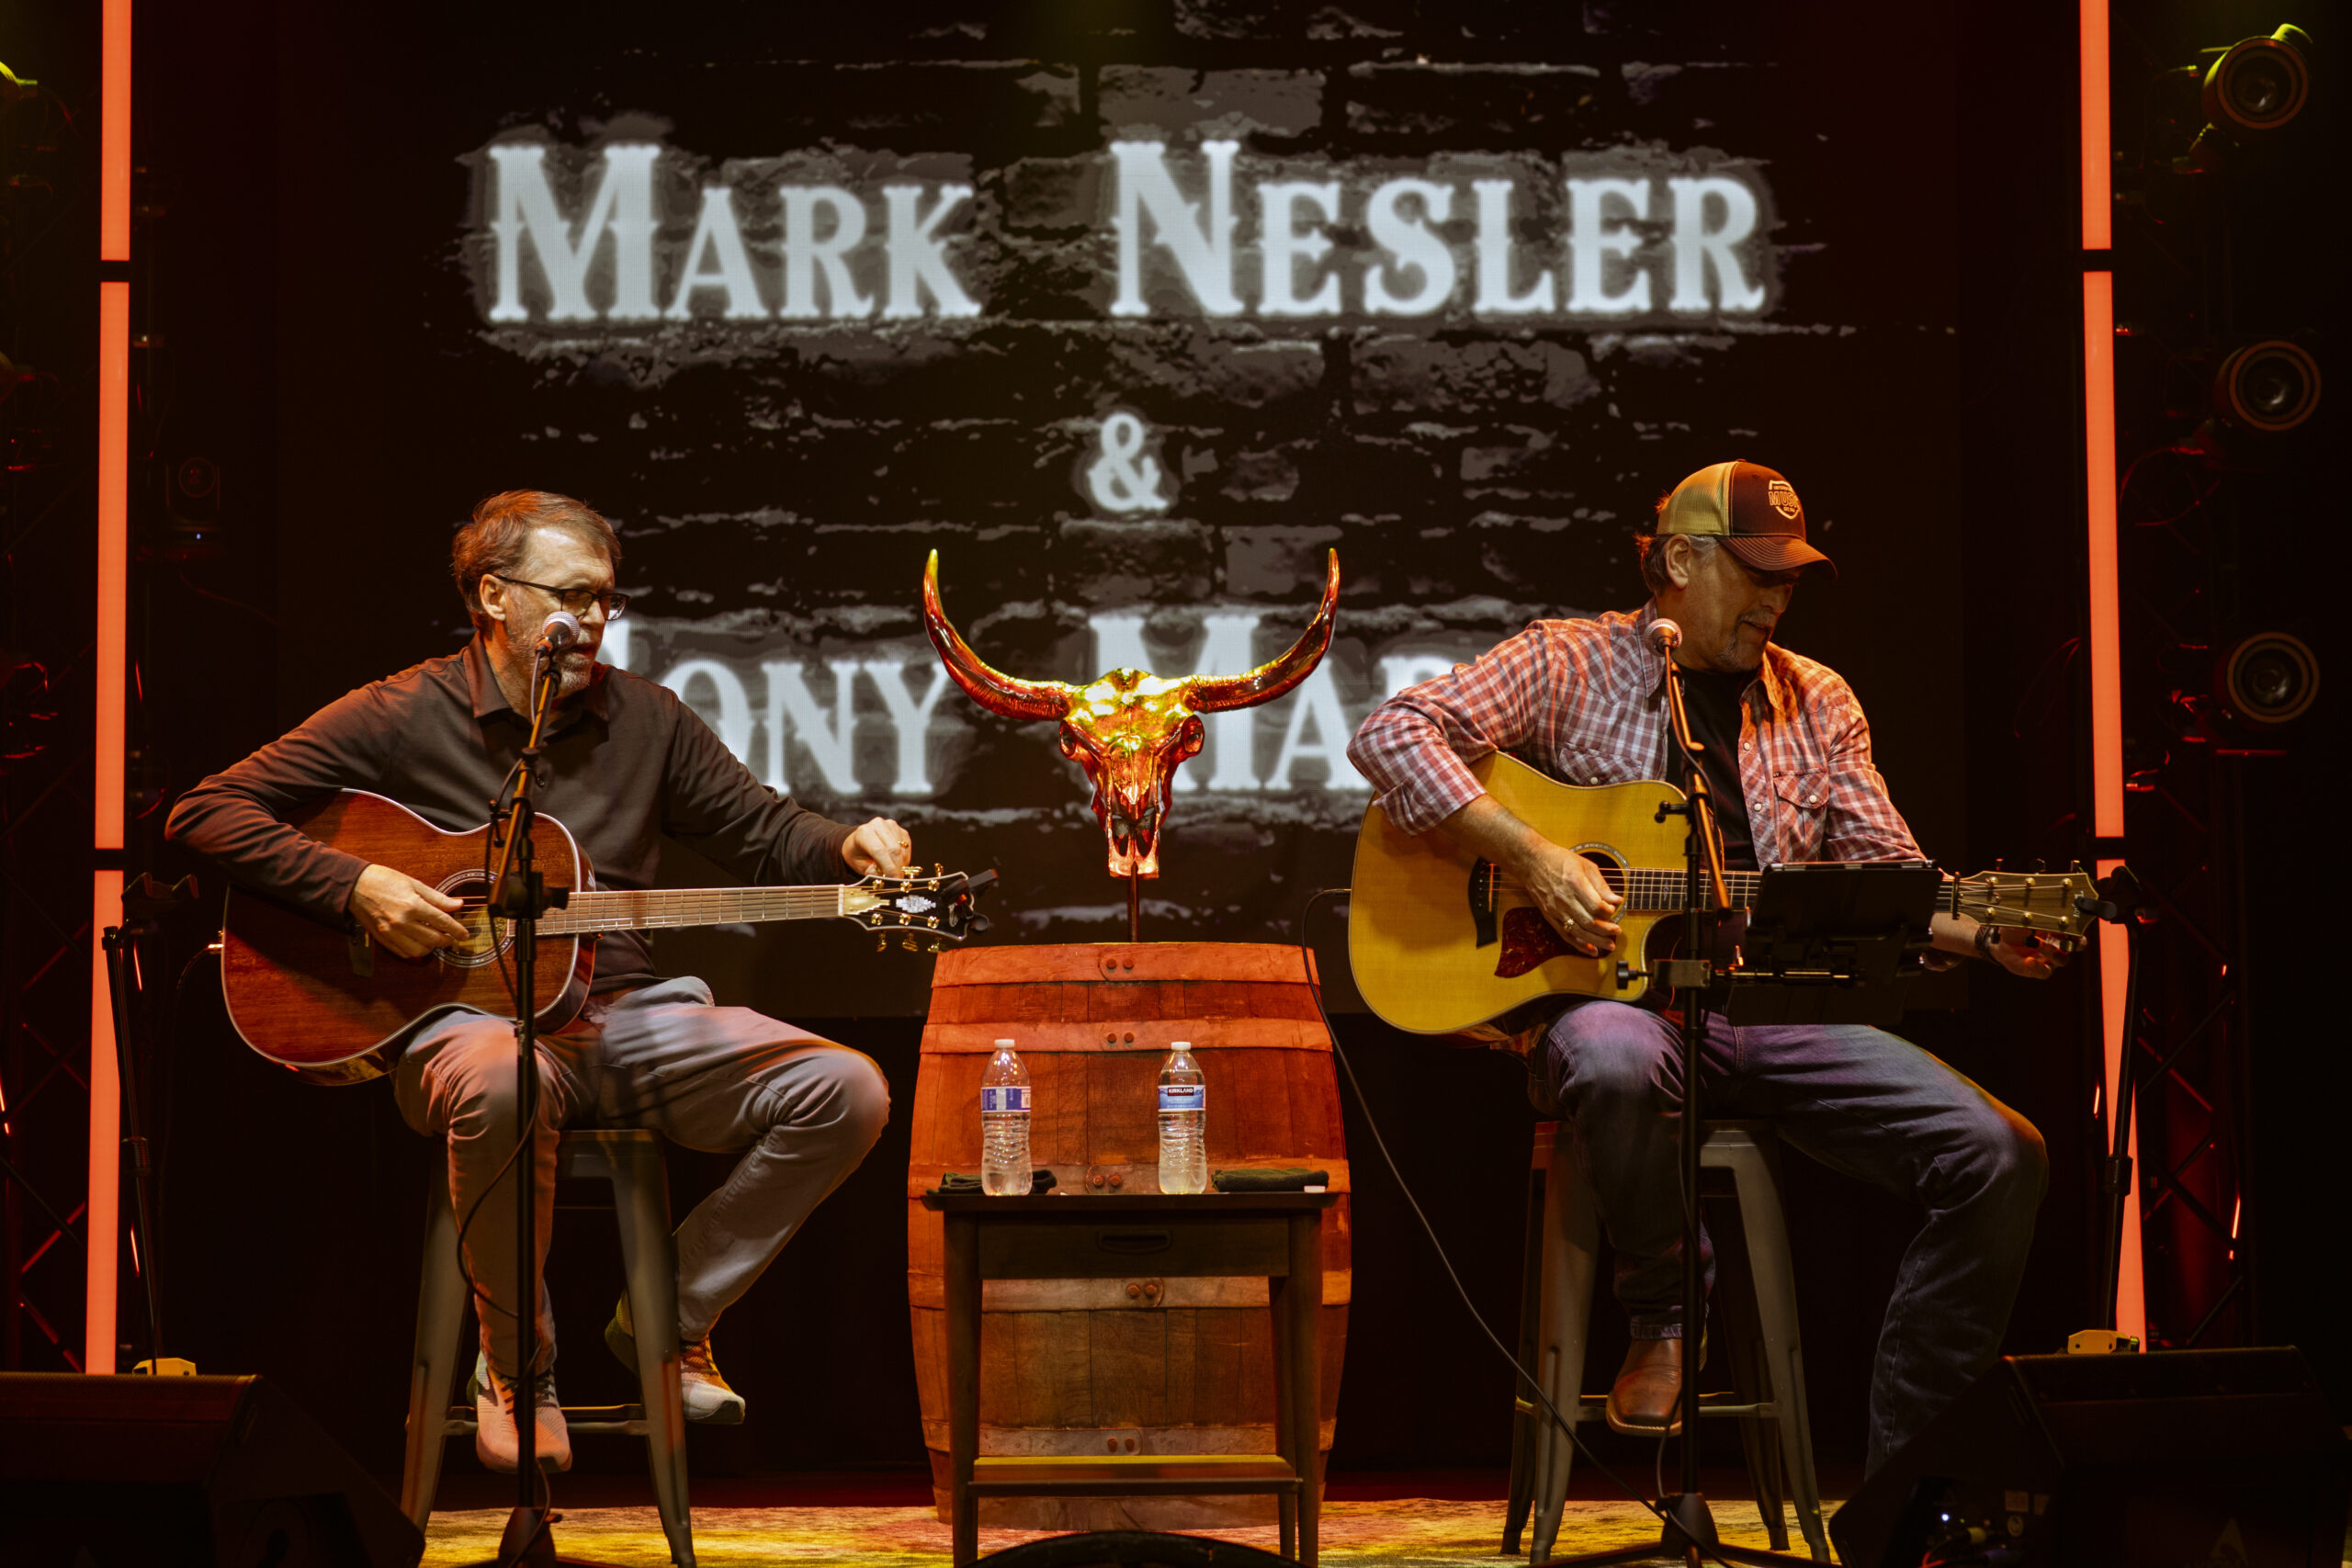 The Stage - Mark Nesler and Tony Martin